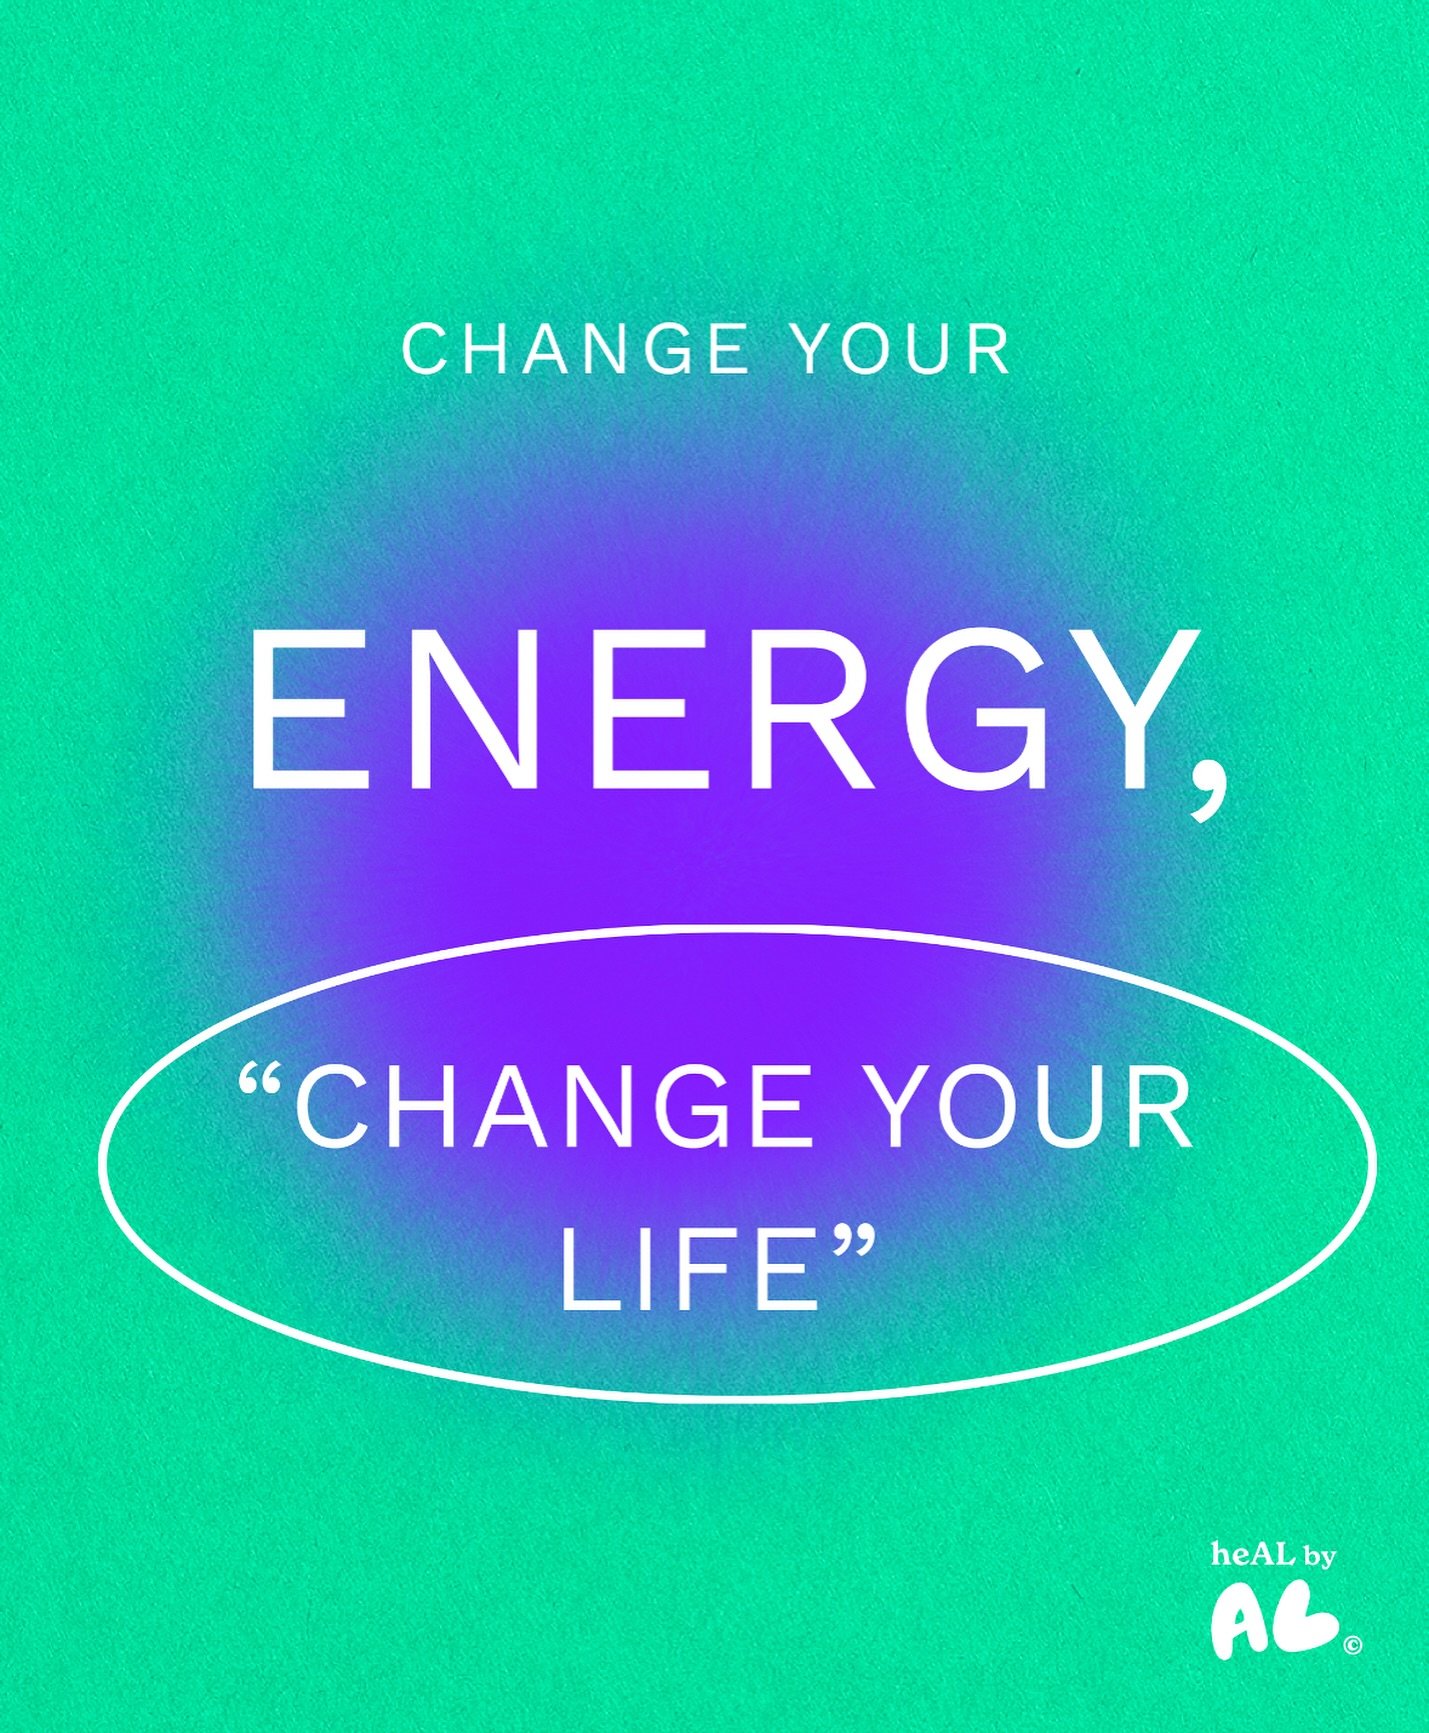 &ldquo;CHANGE YOU ENERGY, CHANGE YOUR LIFE&hellip;&rdquo;

I see this every day with my clients.  If you have never had energy healing with me before, it&rsquo;s hard to explain what I can do &amp; what beautiful gift I have from my spiritual awakeni